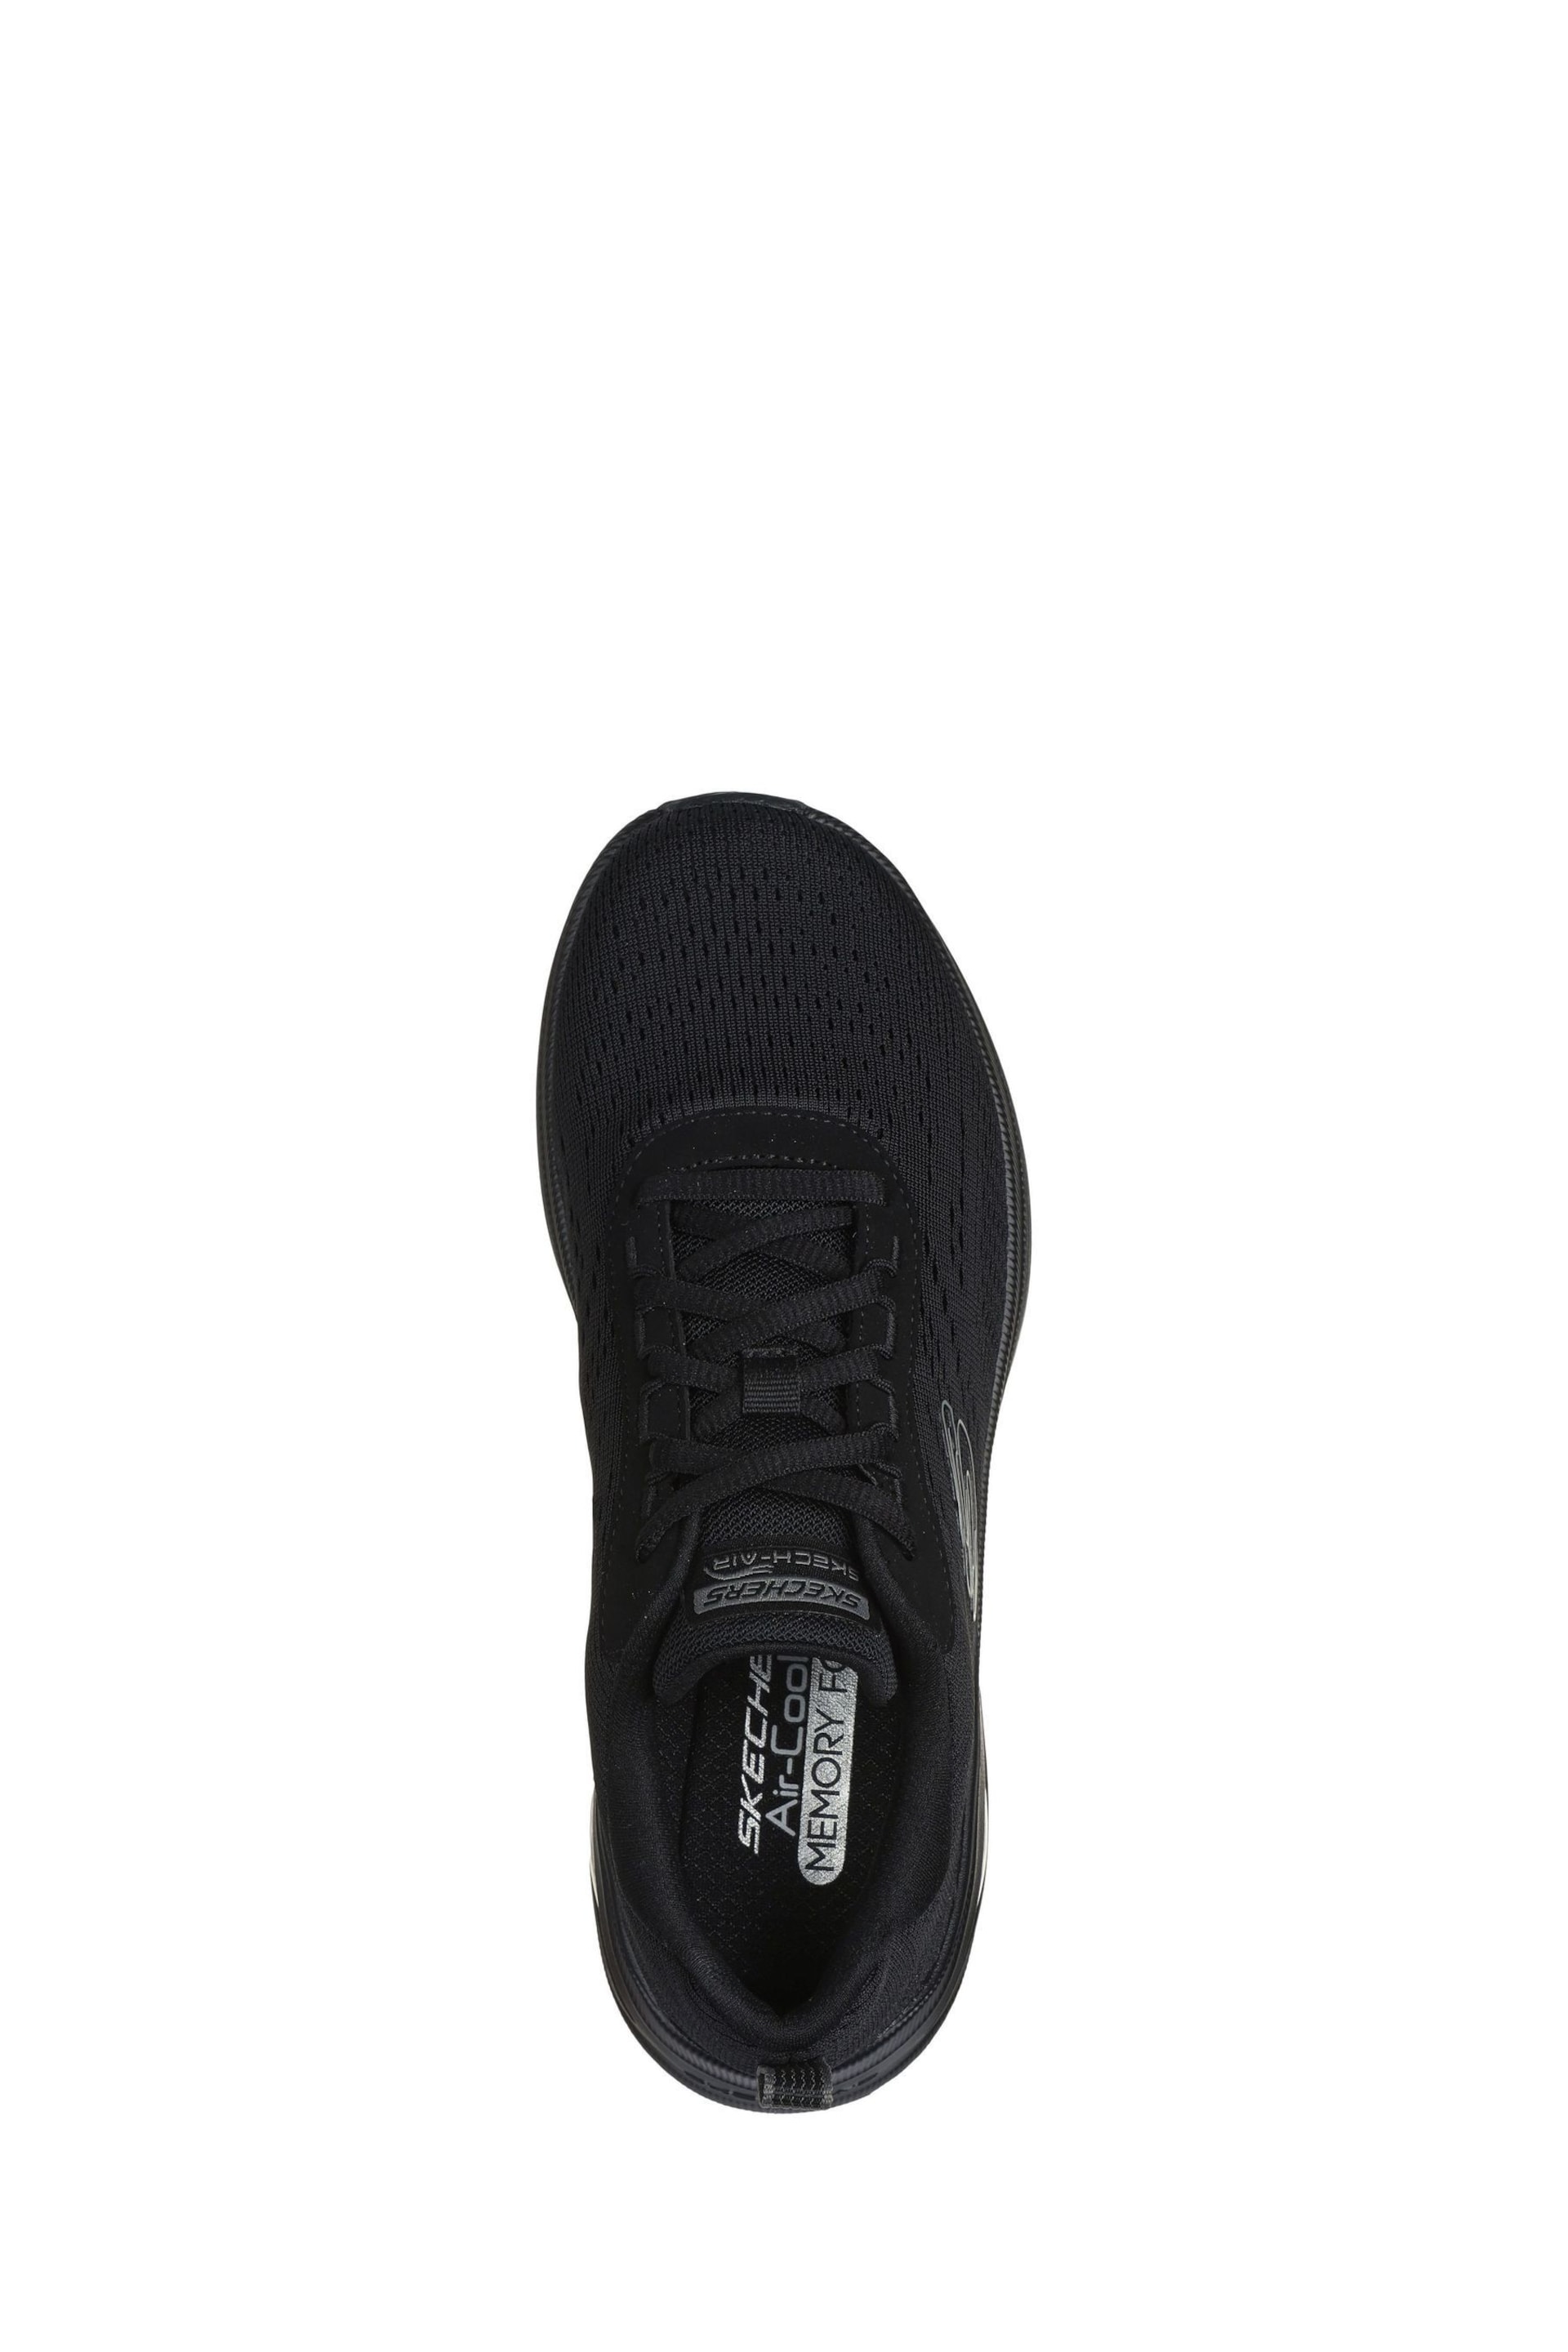 Skechers Black Skech-Air Meta Aired Out Trainers - Image 4 of 5